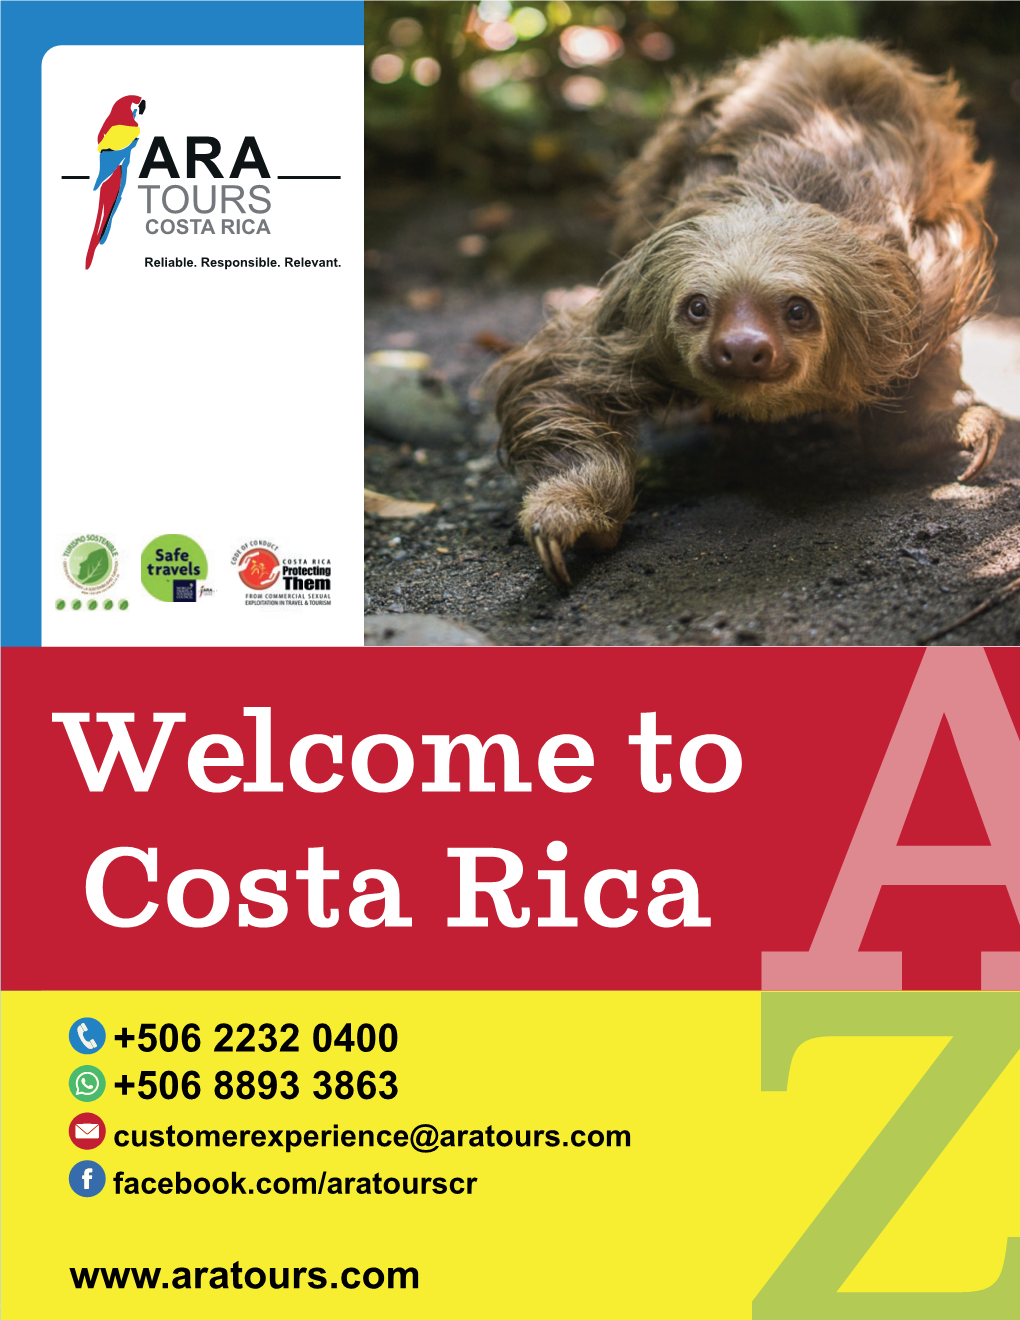 Welcome to Costa Rica